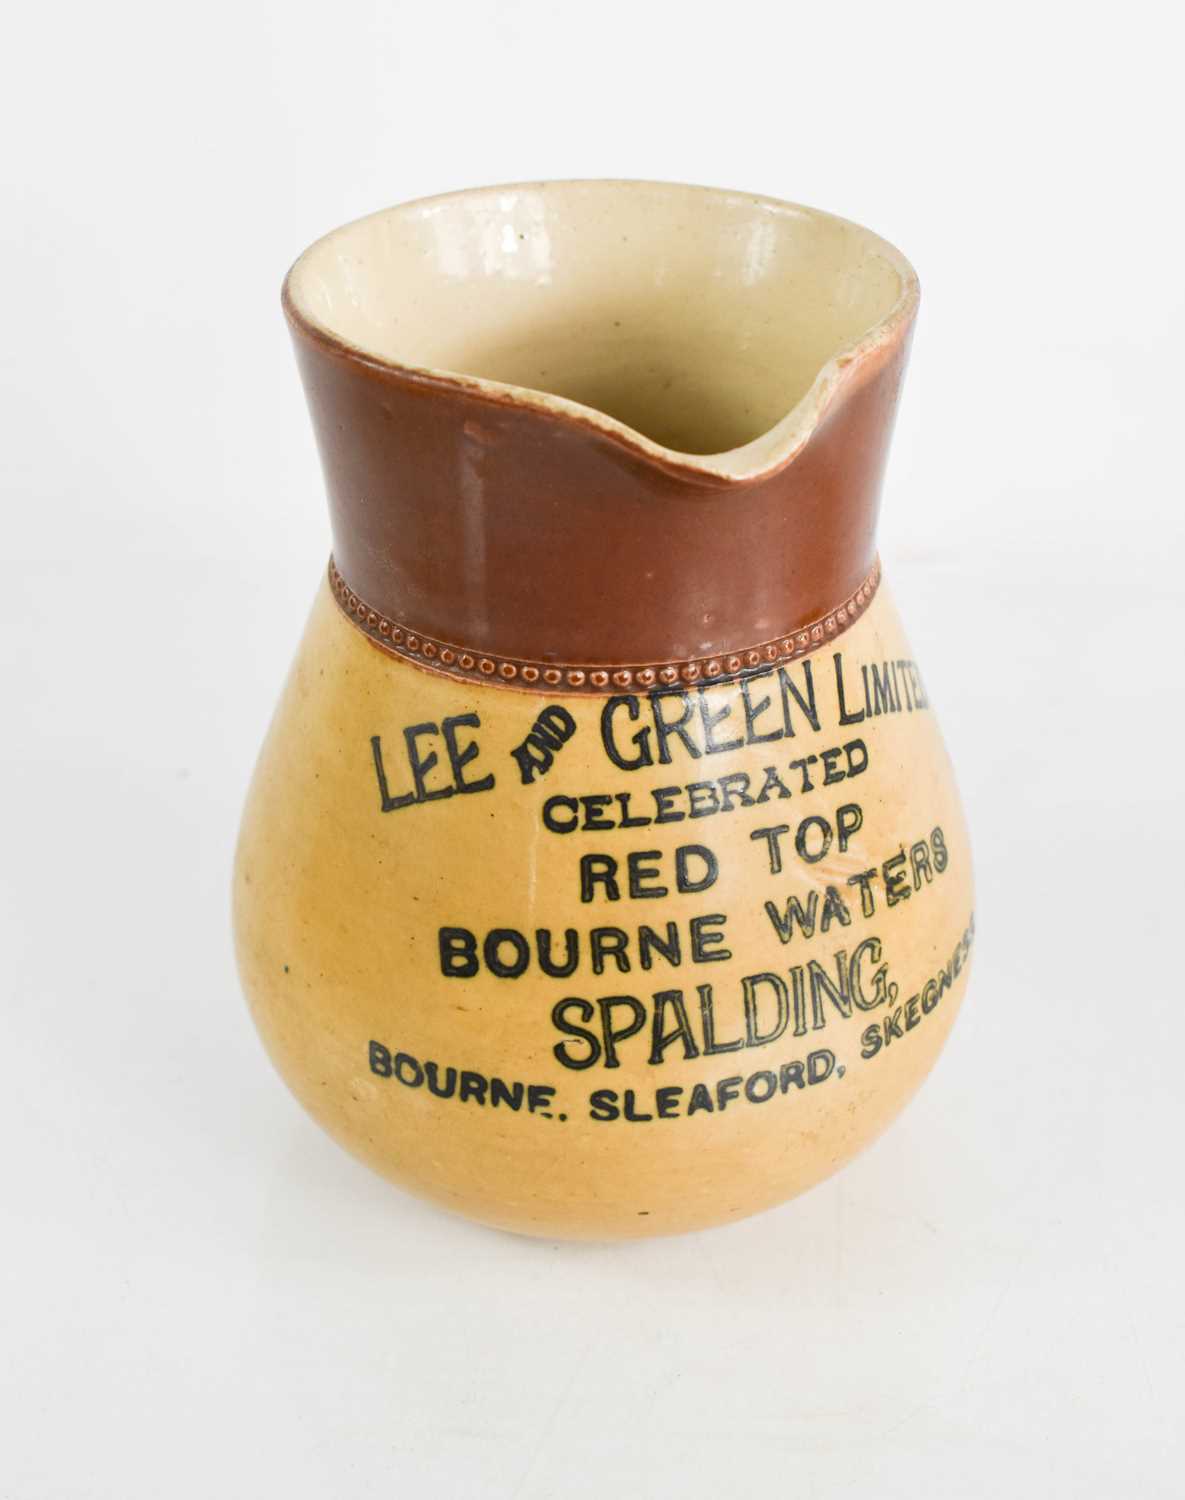 Local interest: Lee and Green Limited stoneware jug, celebrated red top Bourne waters, Spalding,